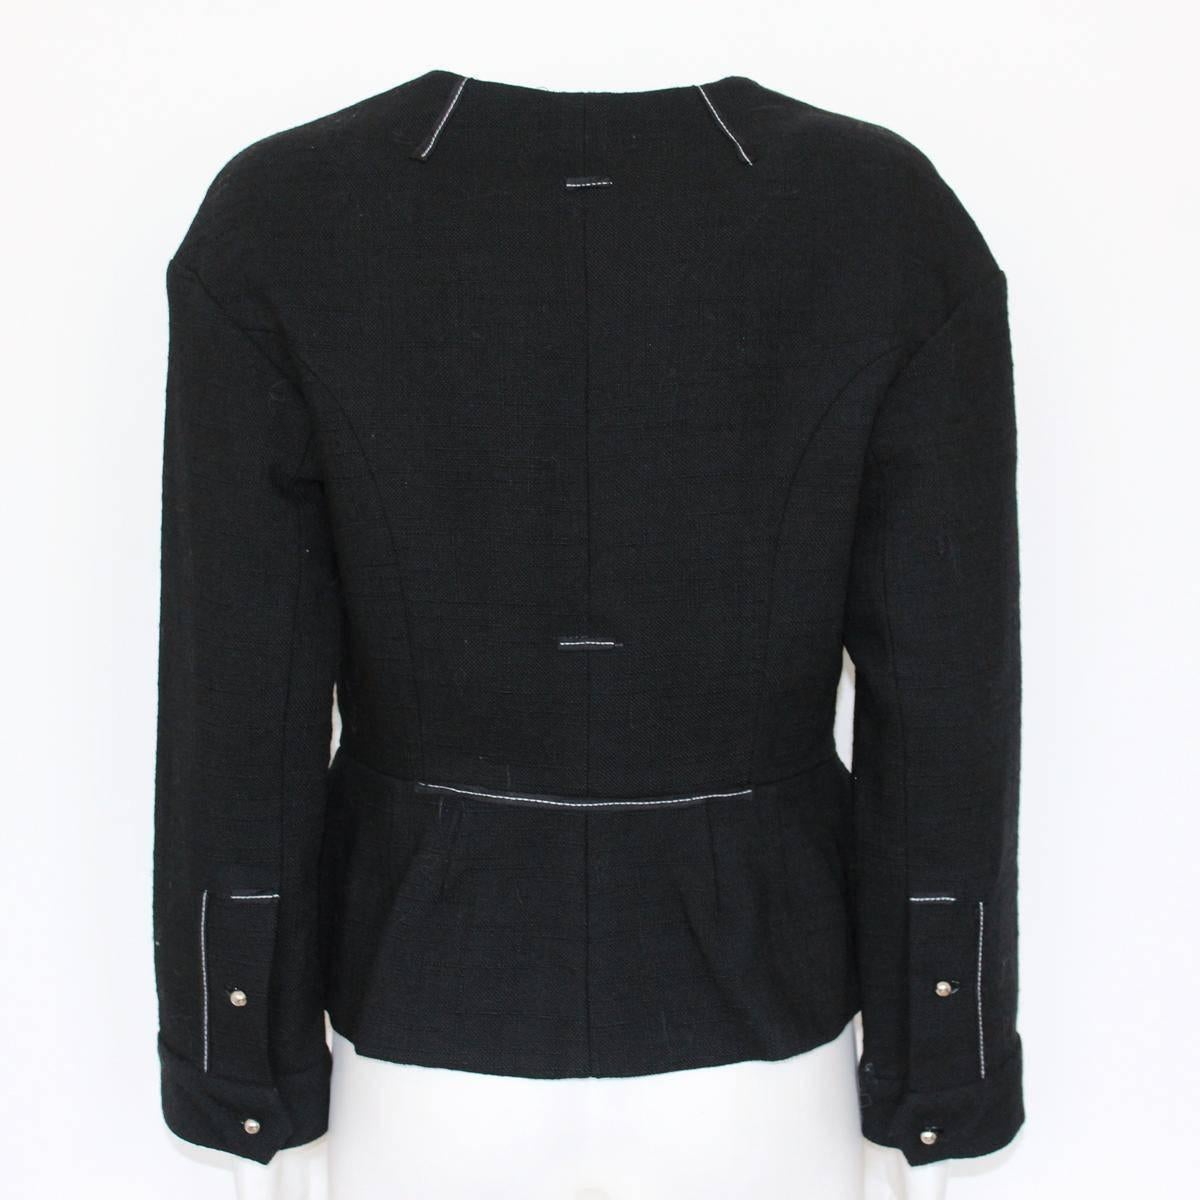 Super chic Marc Jacobs jacket
100% Wool
Black color
Six pockets
Studs applications
Visible stitching
Zip closure
Length from shoulder cm 50 (19.6 inches)
Size 6Fast international shipping included in the price